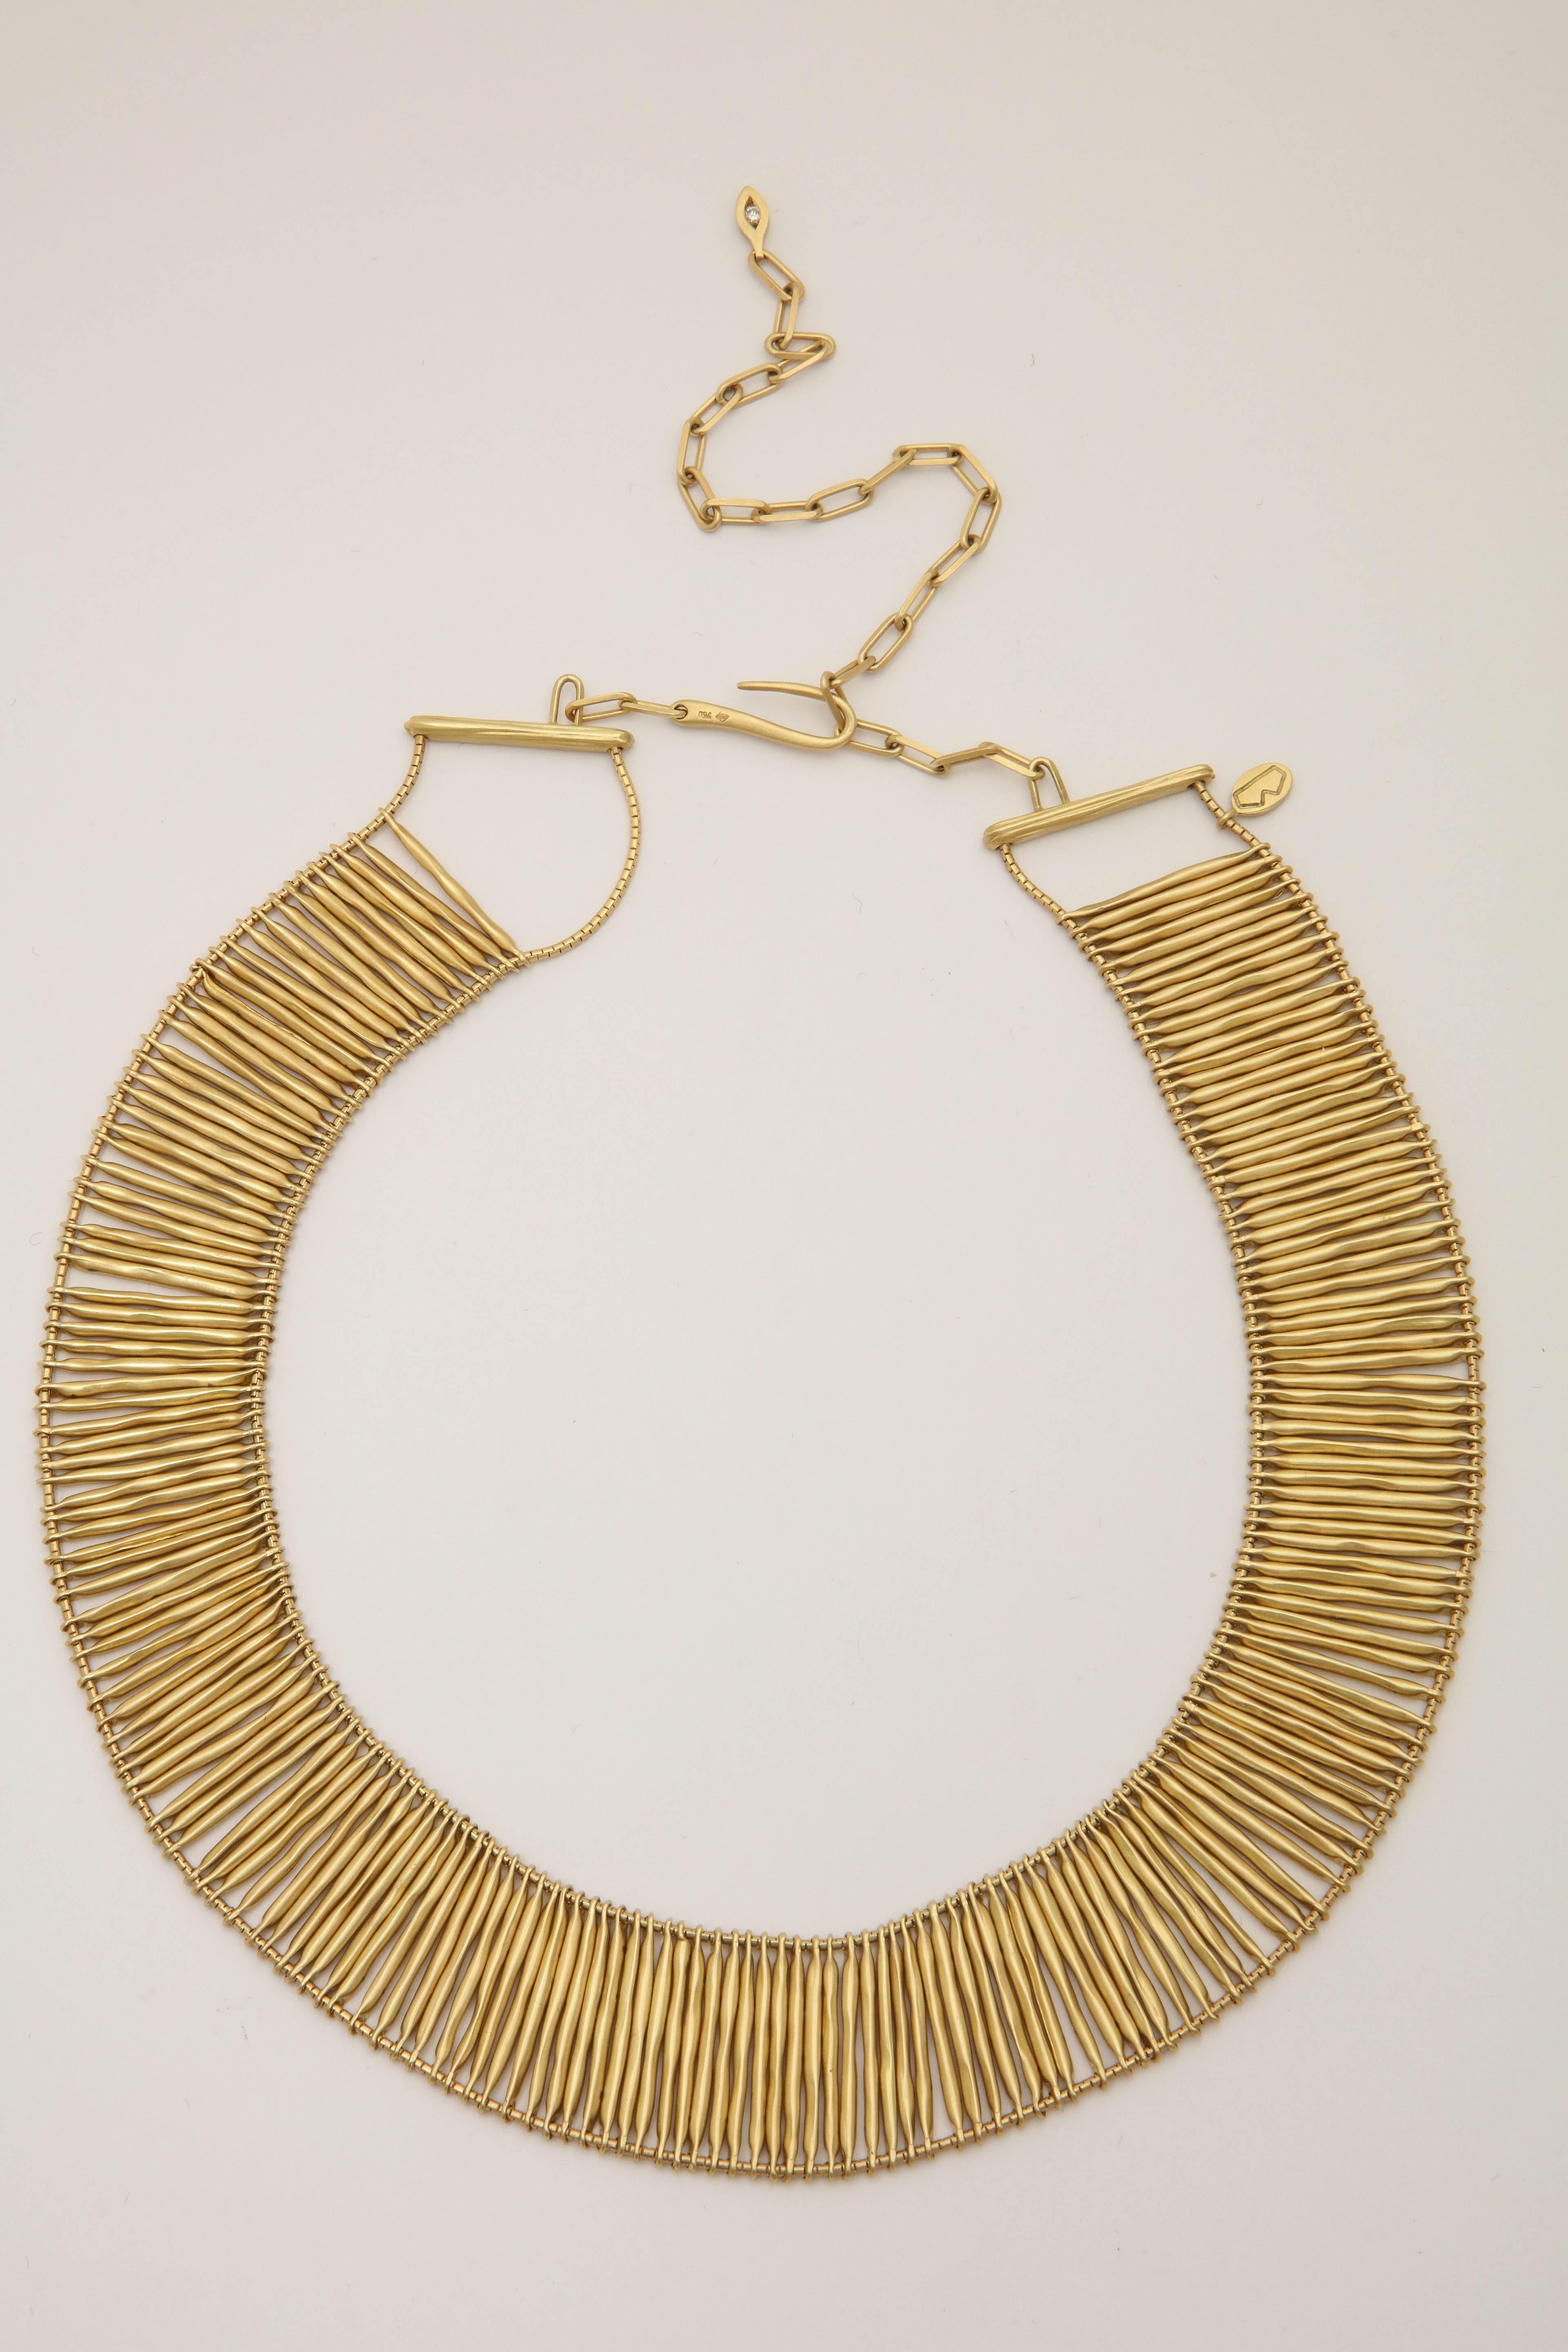 One Ladies 18kt Gold Flexible Necklace Consisting Of Numerous Sliding Gold Stick Pieces To Create A Light And Airy Bohemian Feeling When Worn.NOTE: Necklace May Be Adjusted To Fit A 15 Inch Neck To A 19 Inch Neck Length. Designed By H. Stern In The